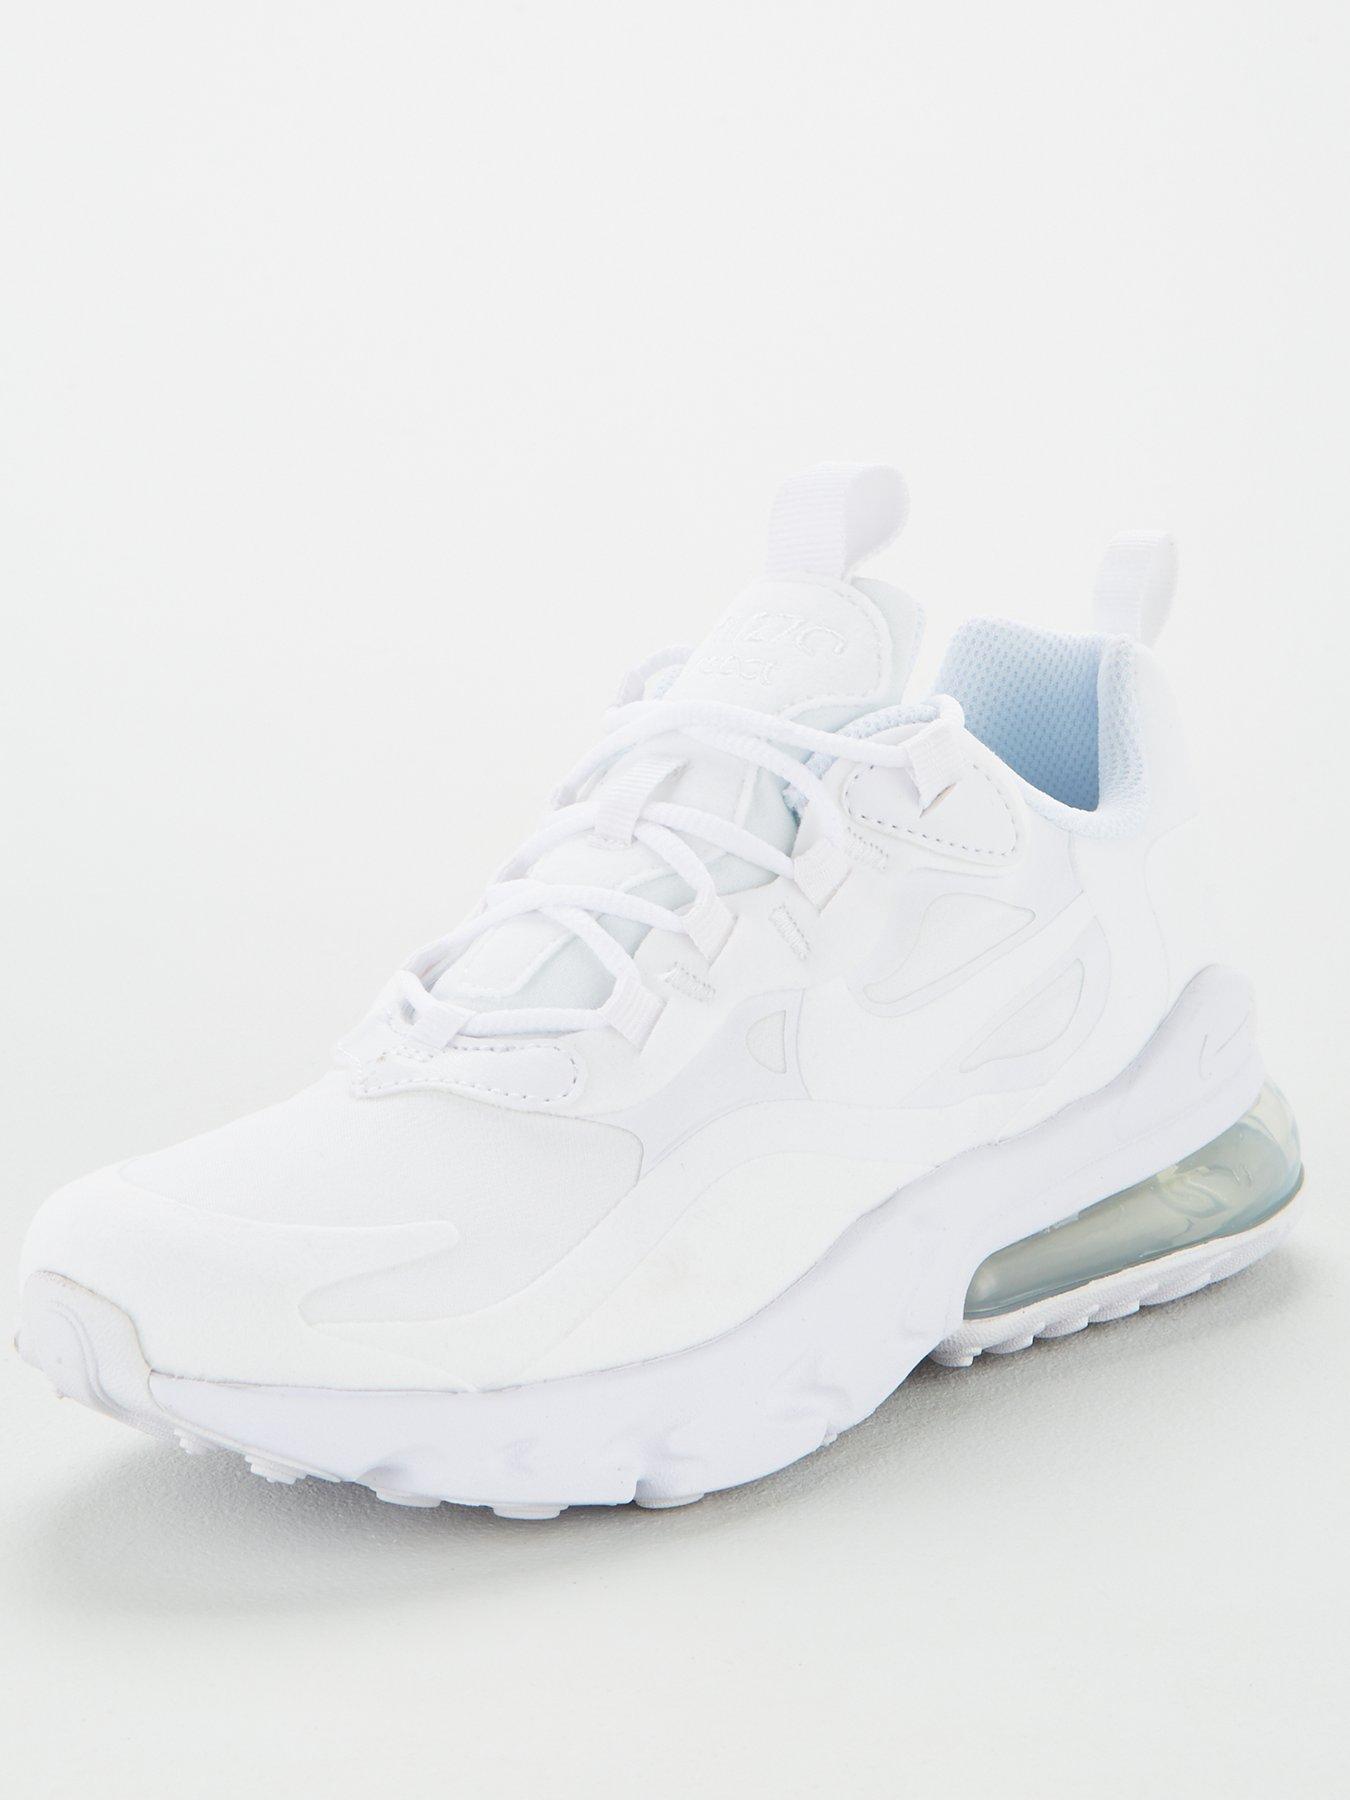 Nike Air Max 270 React Junior Trainers - White | littlewoods.com